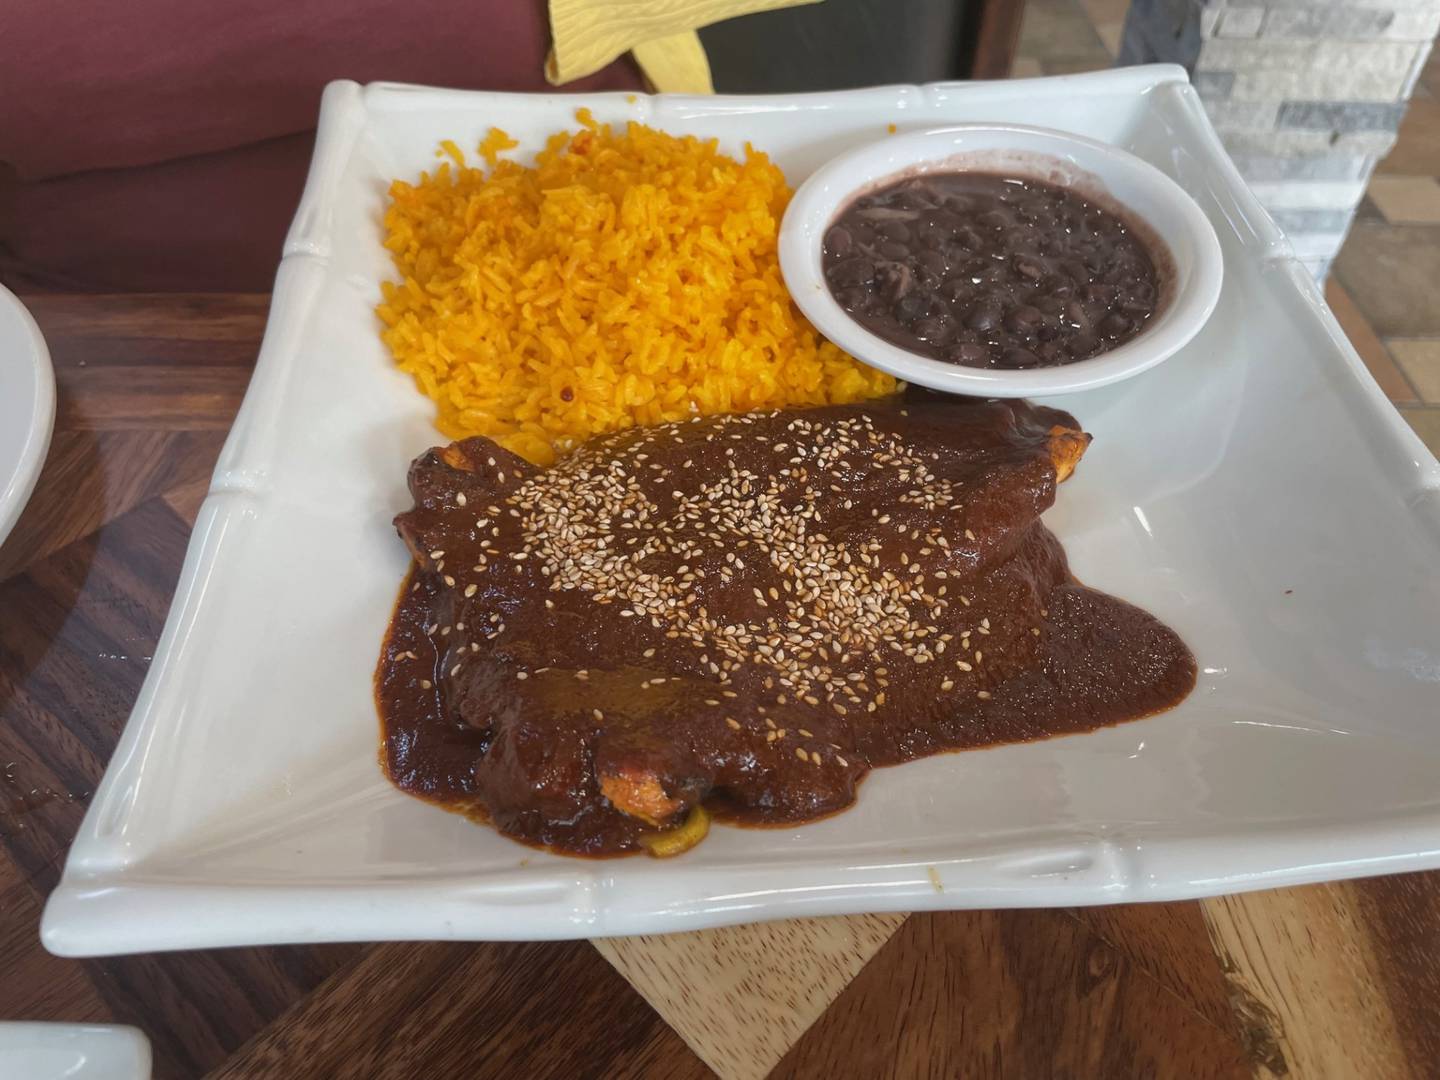 Chicken breast in mole sauce with rice and black beans, one of the entrees available at Blue Margaritas in Oglesby. The people who converted the former KFC/Taco Bell into a sit-down restaurant put as much care into the plating as in the lush decor.